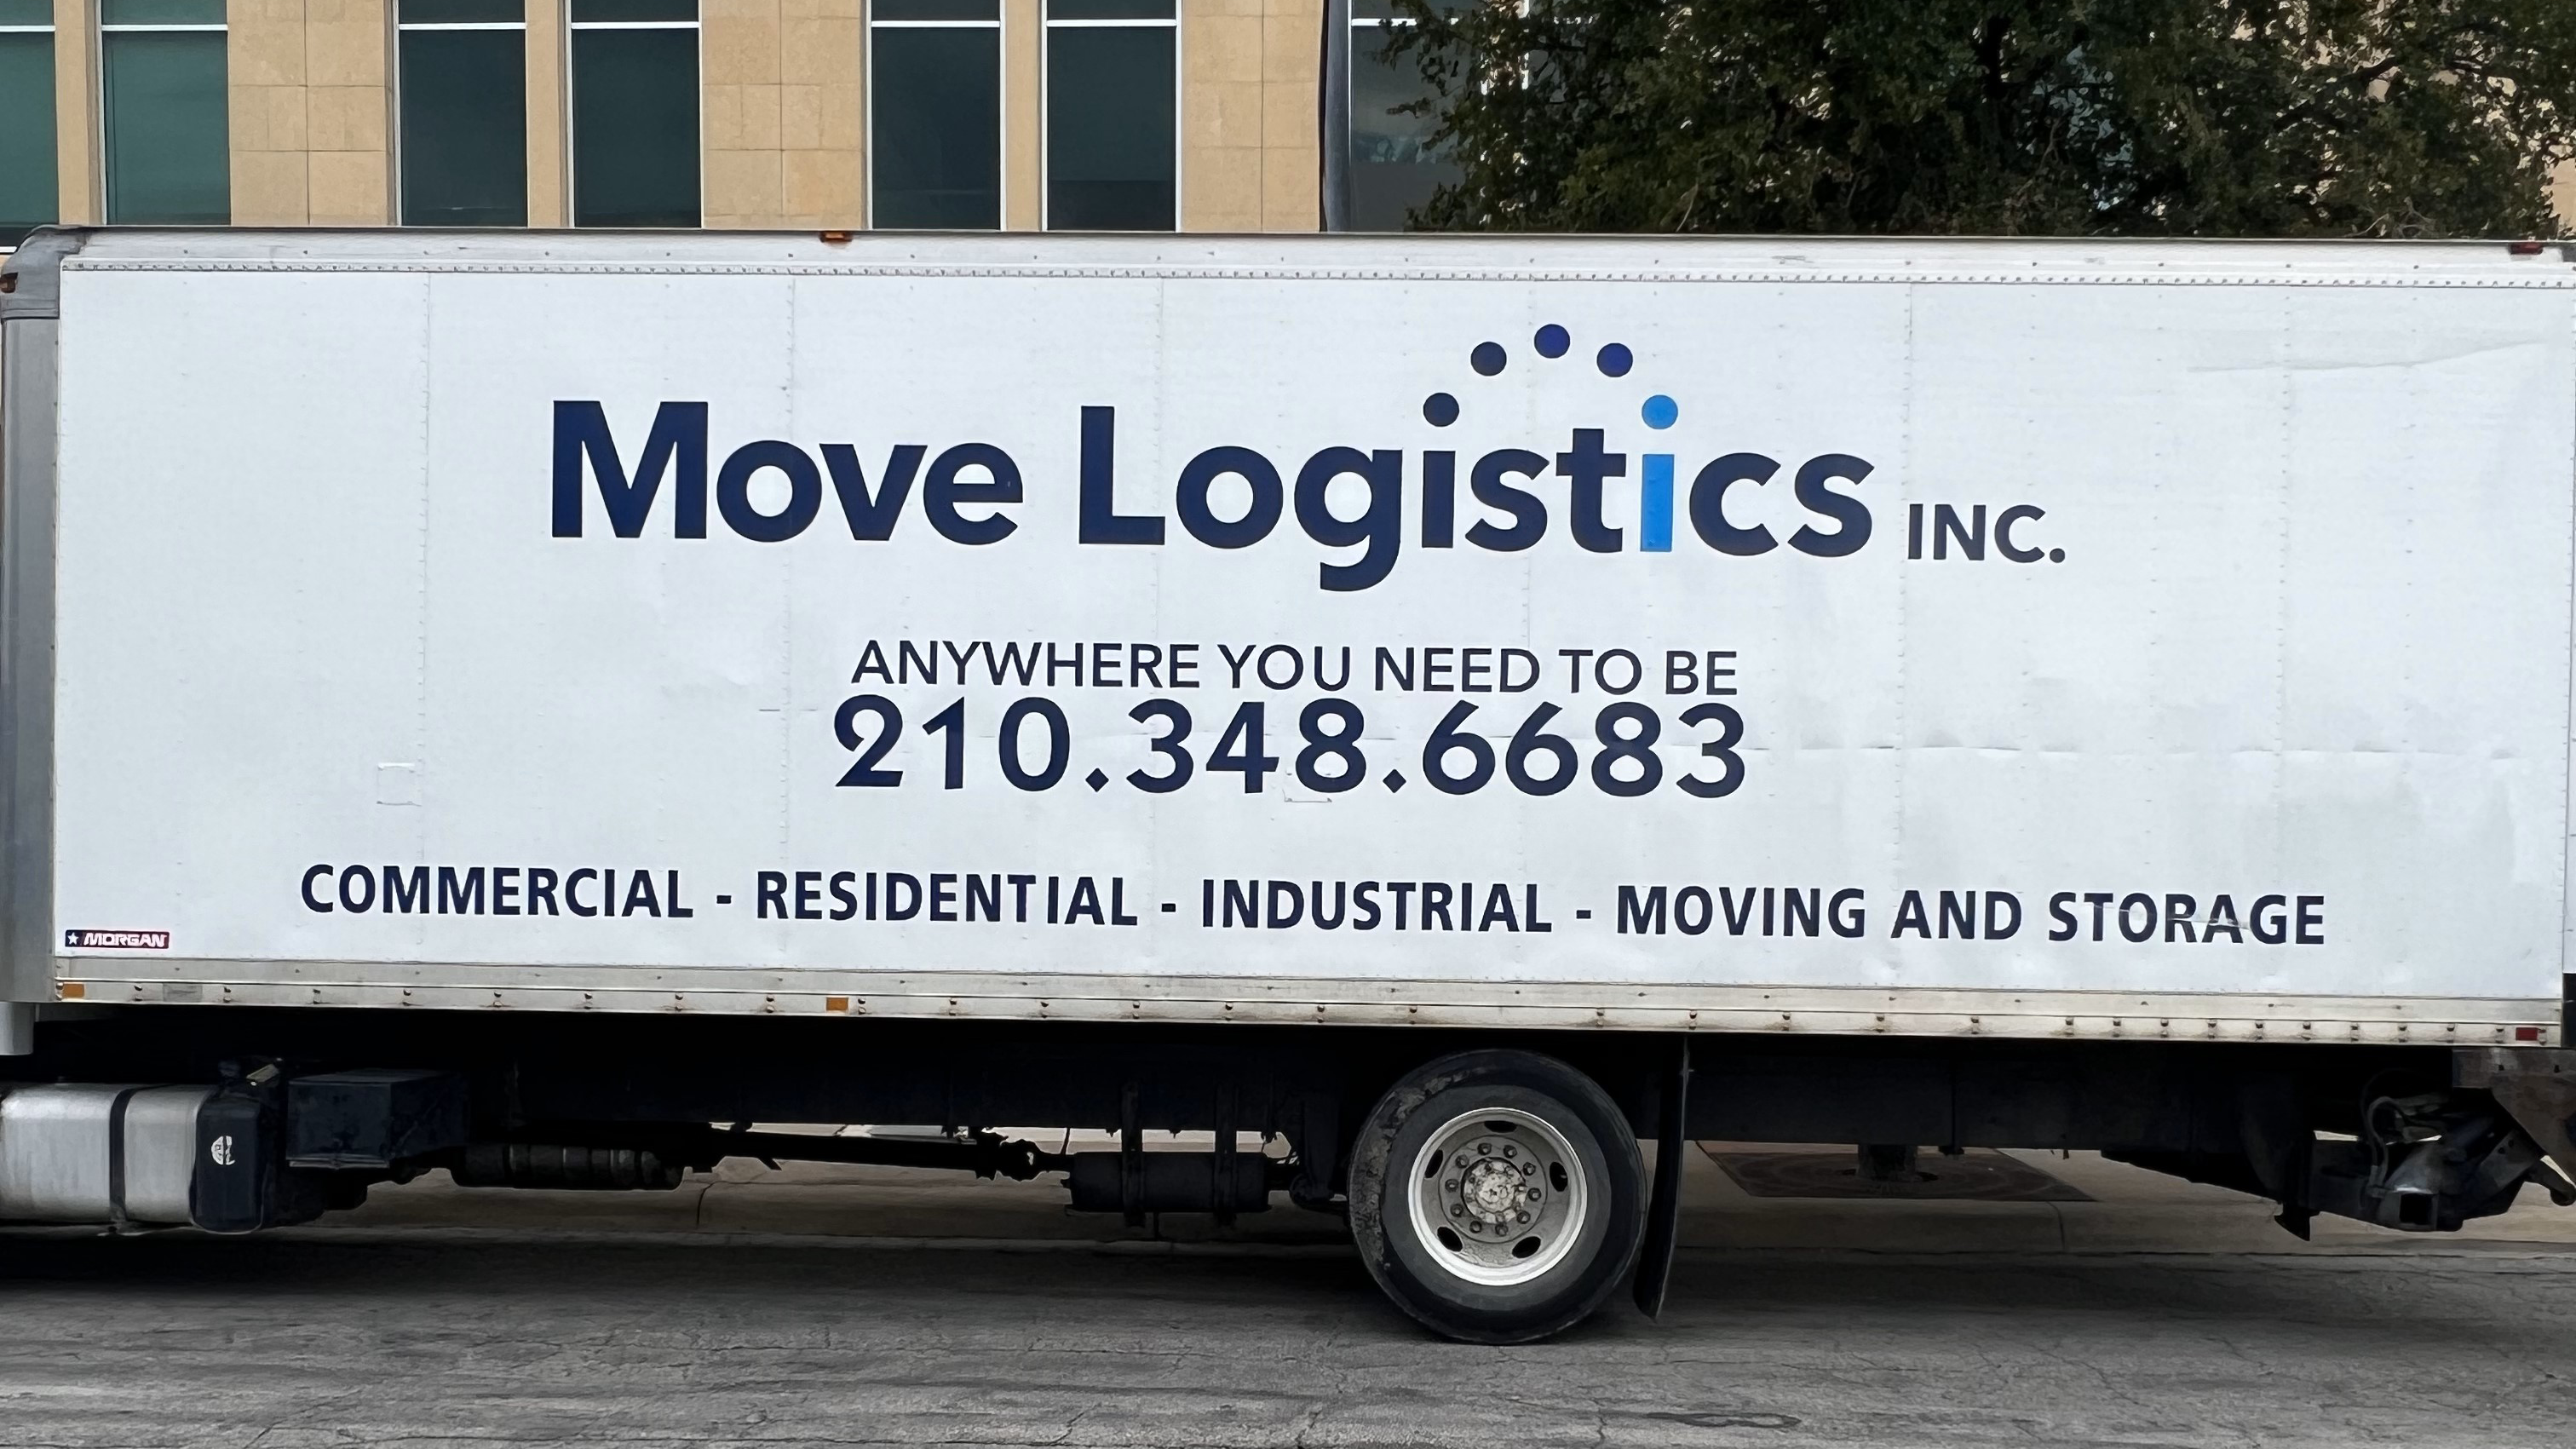 Moving Company truck